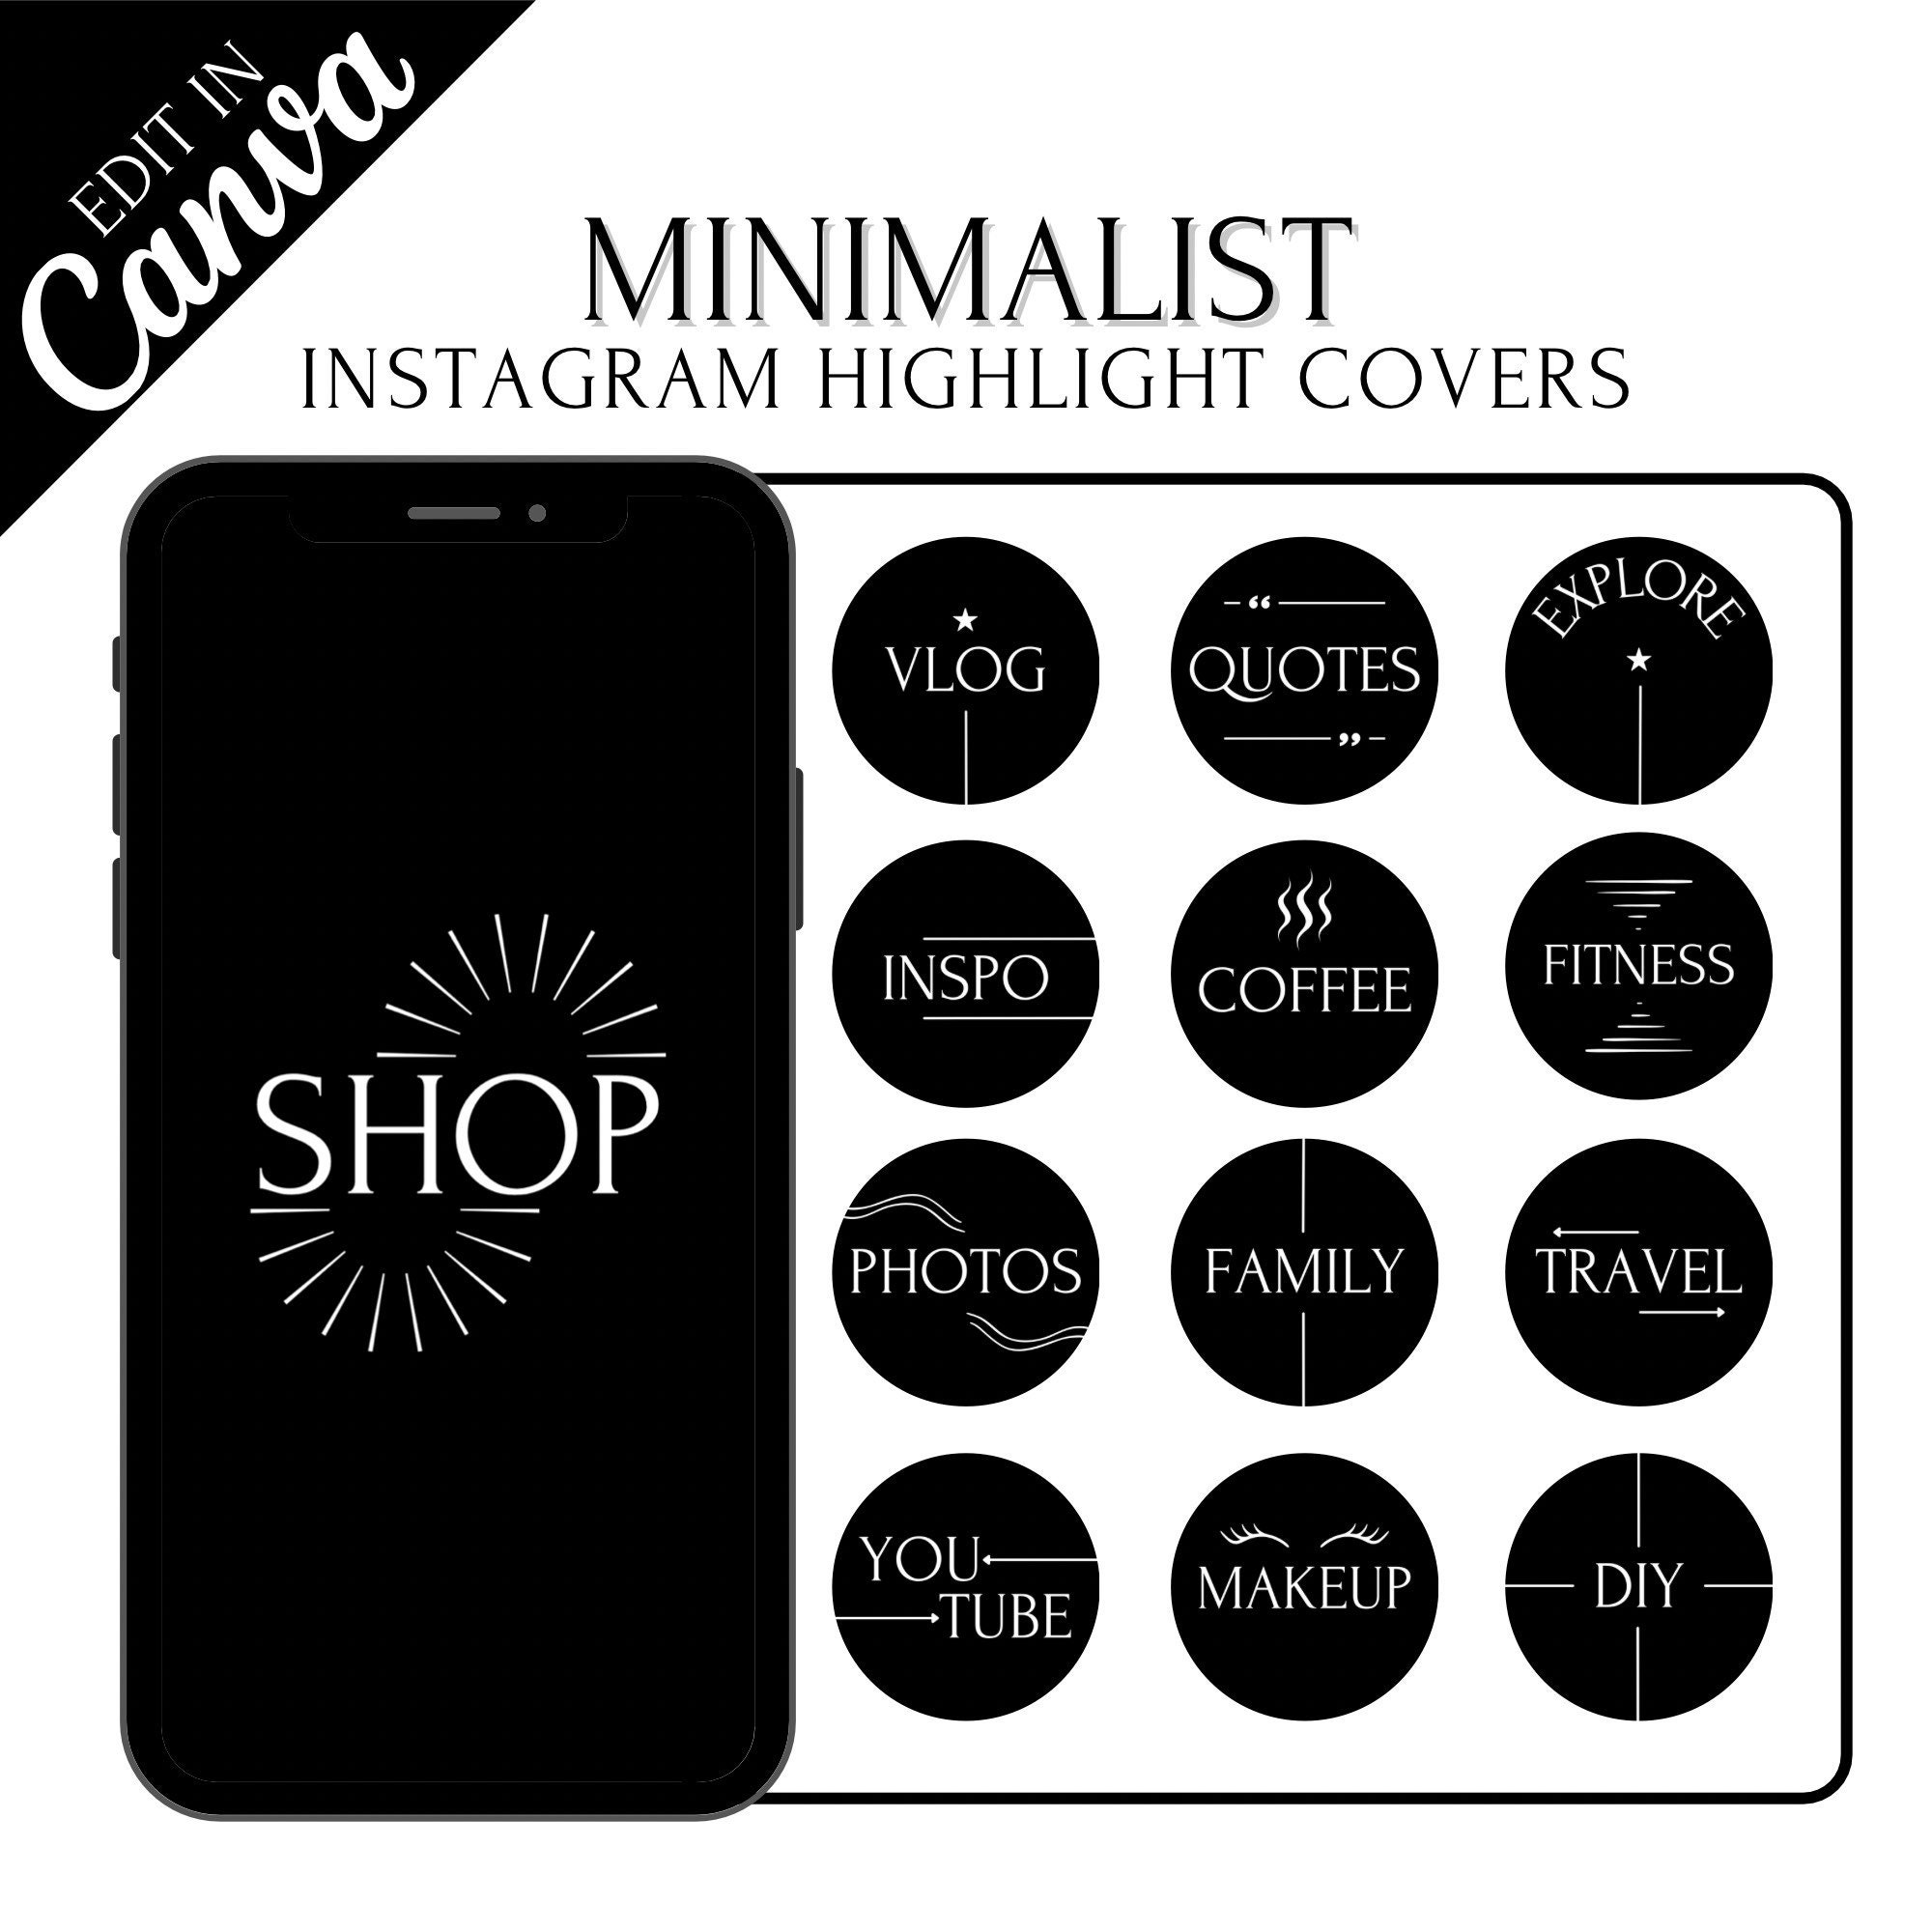 Instagram Highlight Covers Minimalist, Black and White IG Highlight ...